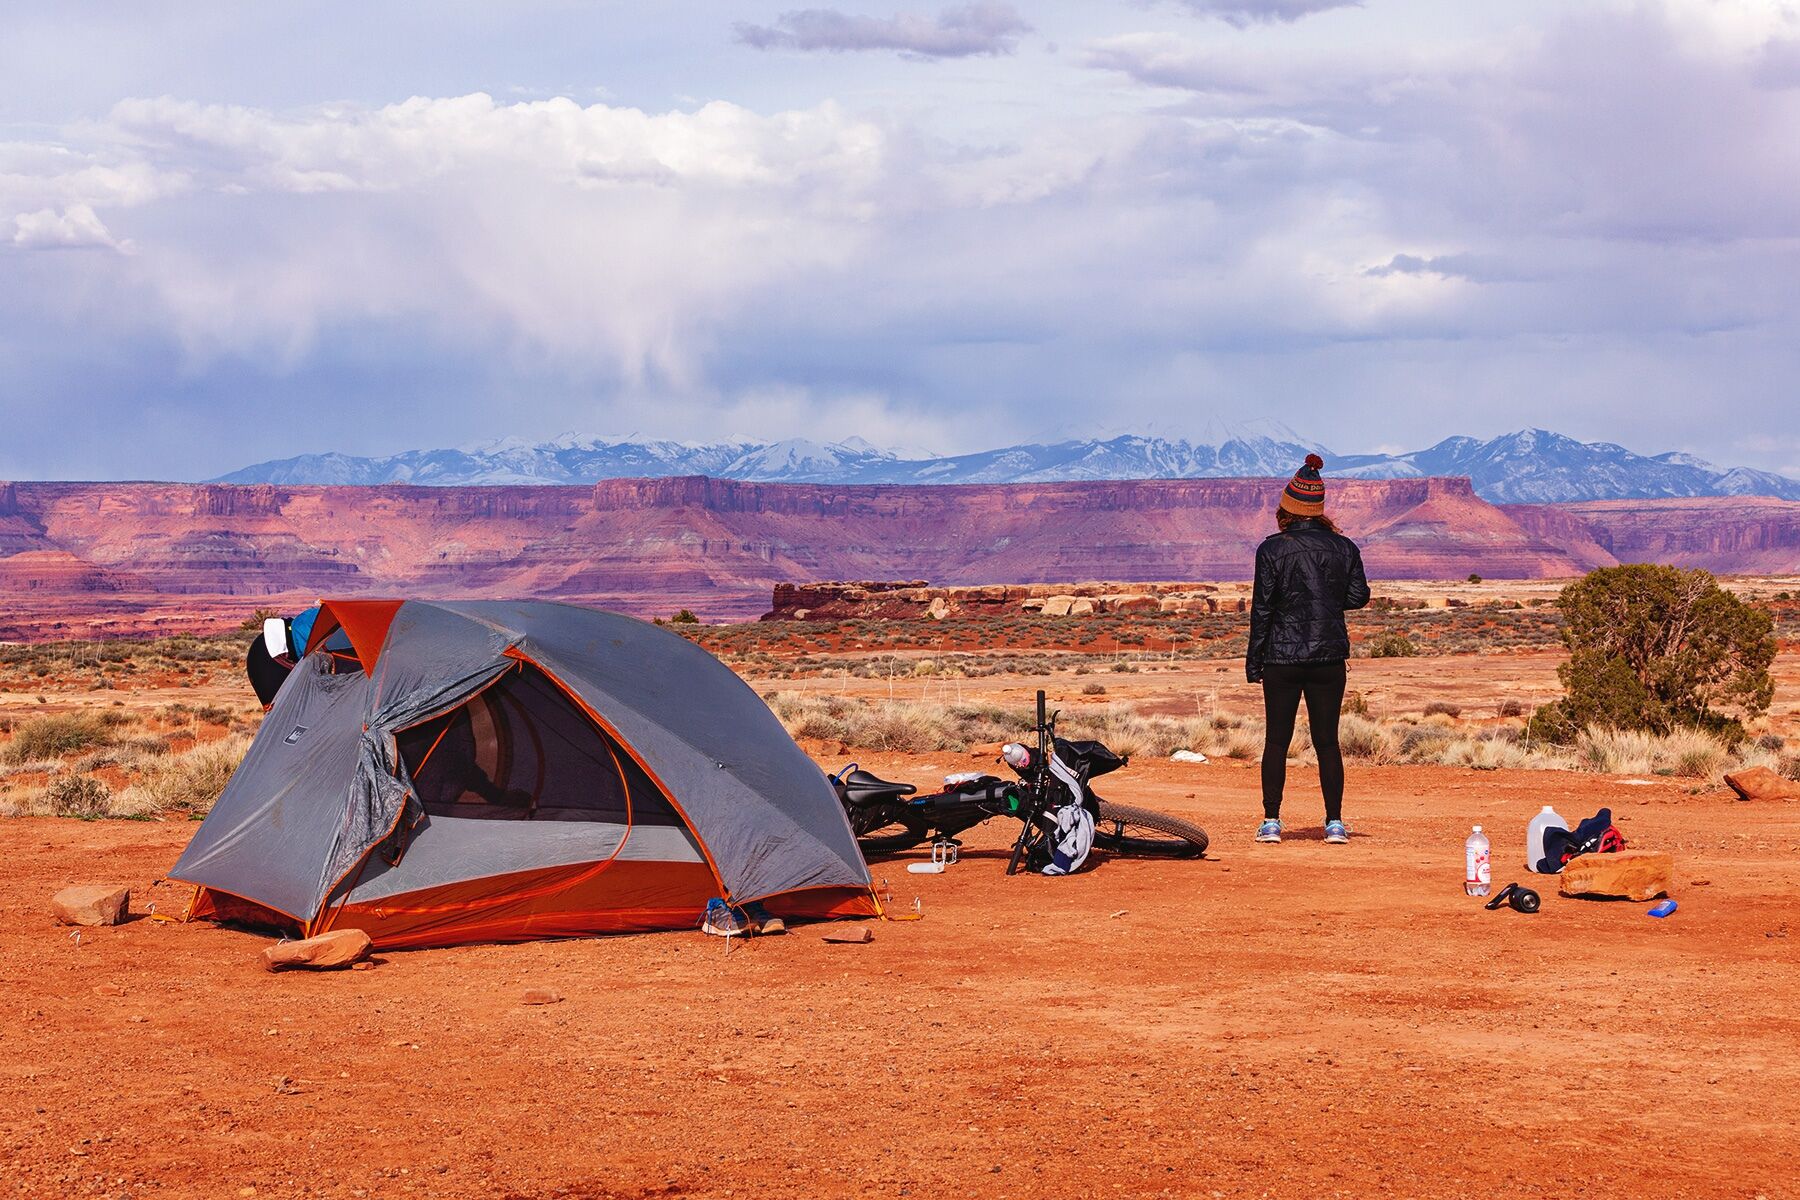 A landscape-oriented wide shot showing a campsite in the foreground, and sandstone cliffs, snow-capped mountains, and tick clouds in layers in the distant background. There is a tent on the left side of the foreground, a mountain bike laying on the ground to the right of it with various camping items strewn across the ground, and then a woman dressed in black leggings, a black jacket, and a navy and orange winter hat, her back to the camera, looking off into the distance.